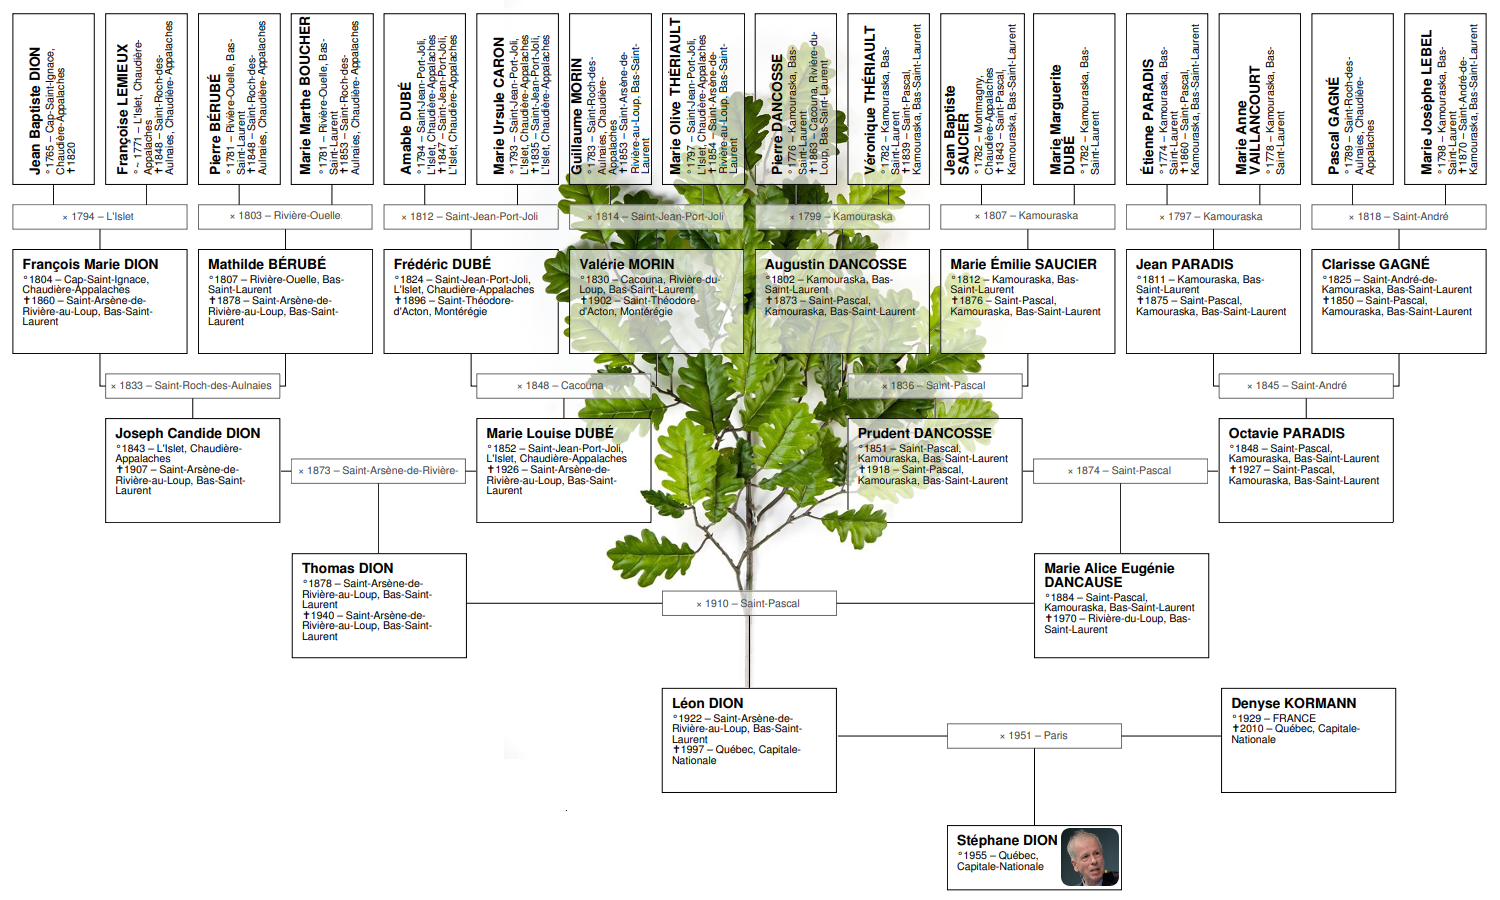 Family tree of Stéphane Dion